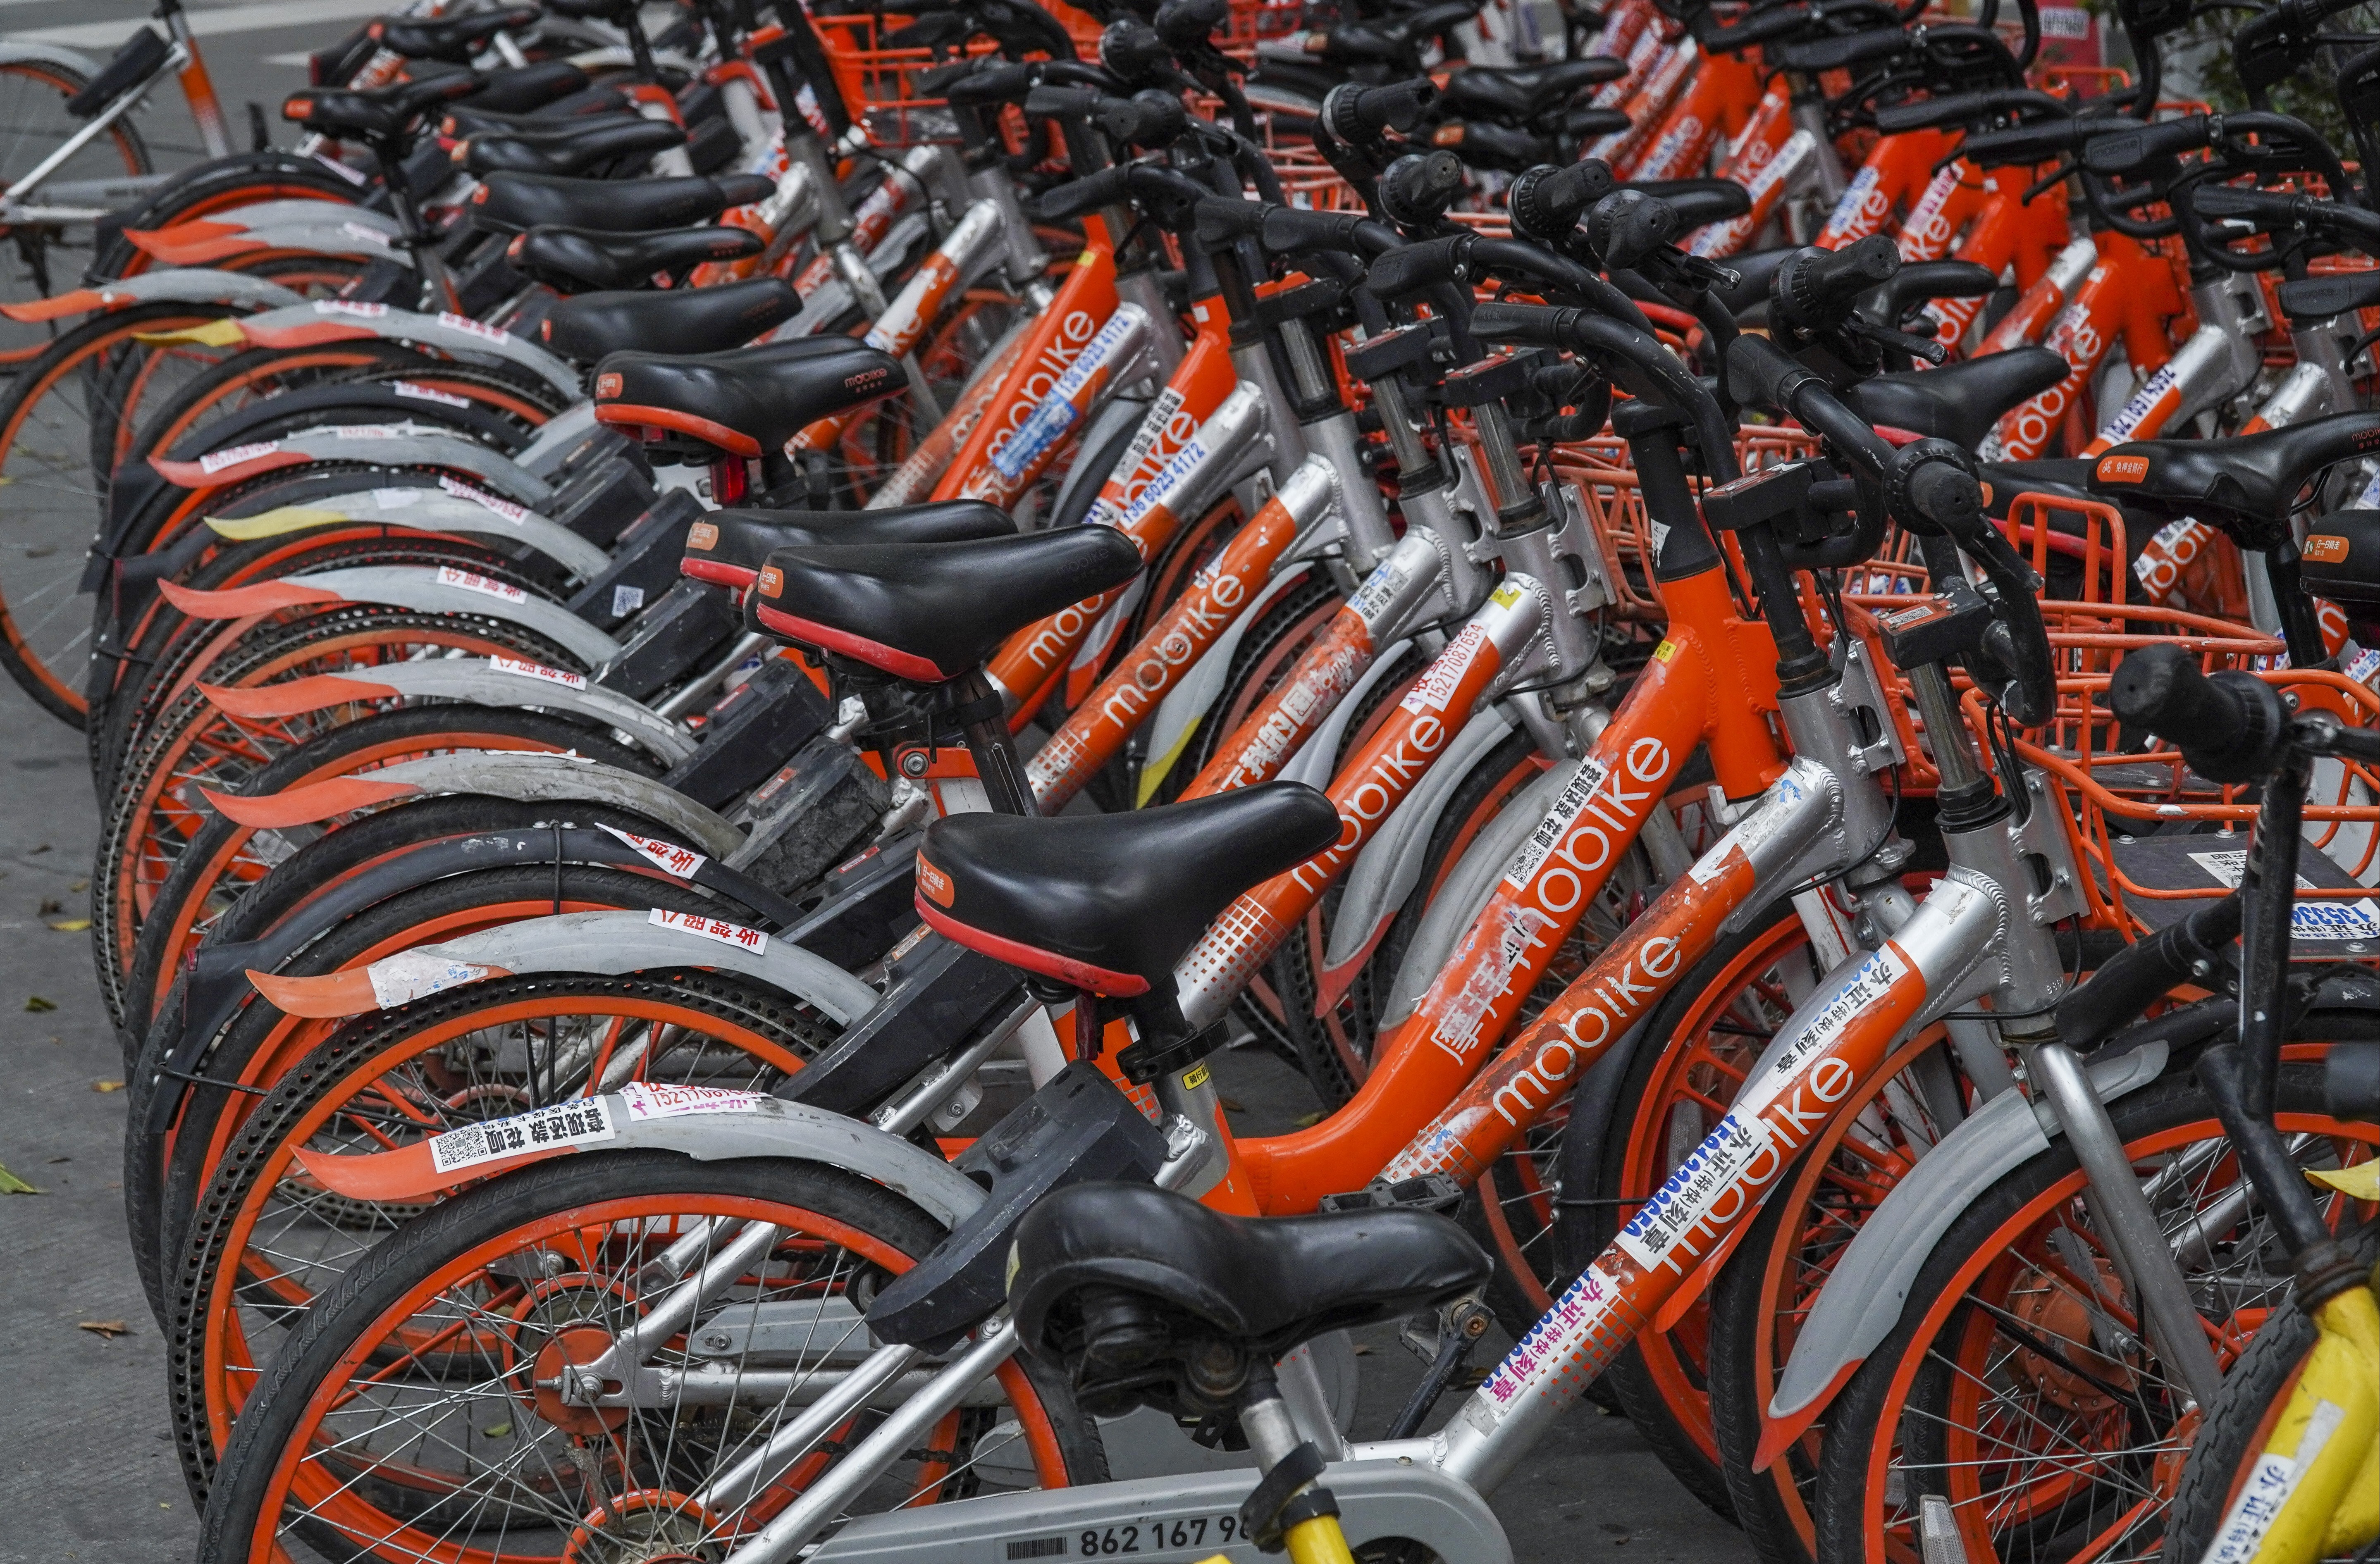 Mobike bicycles parked on the street in the Futian district in Shenzhen in 2019. Photo: SCMP / Roy Issa